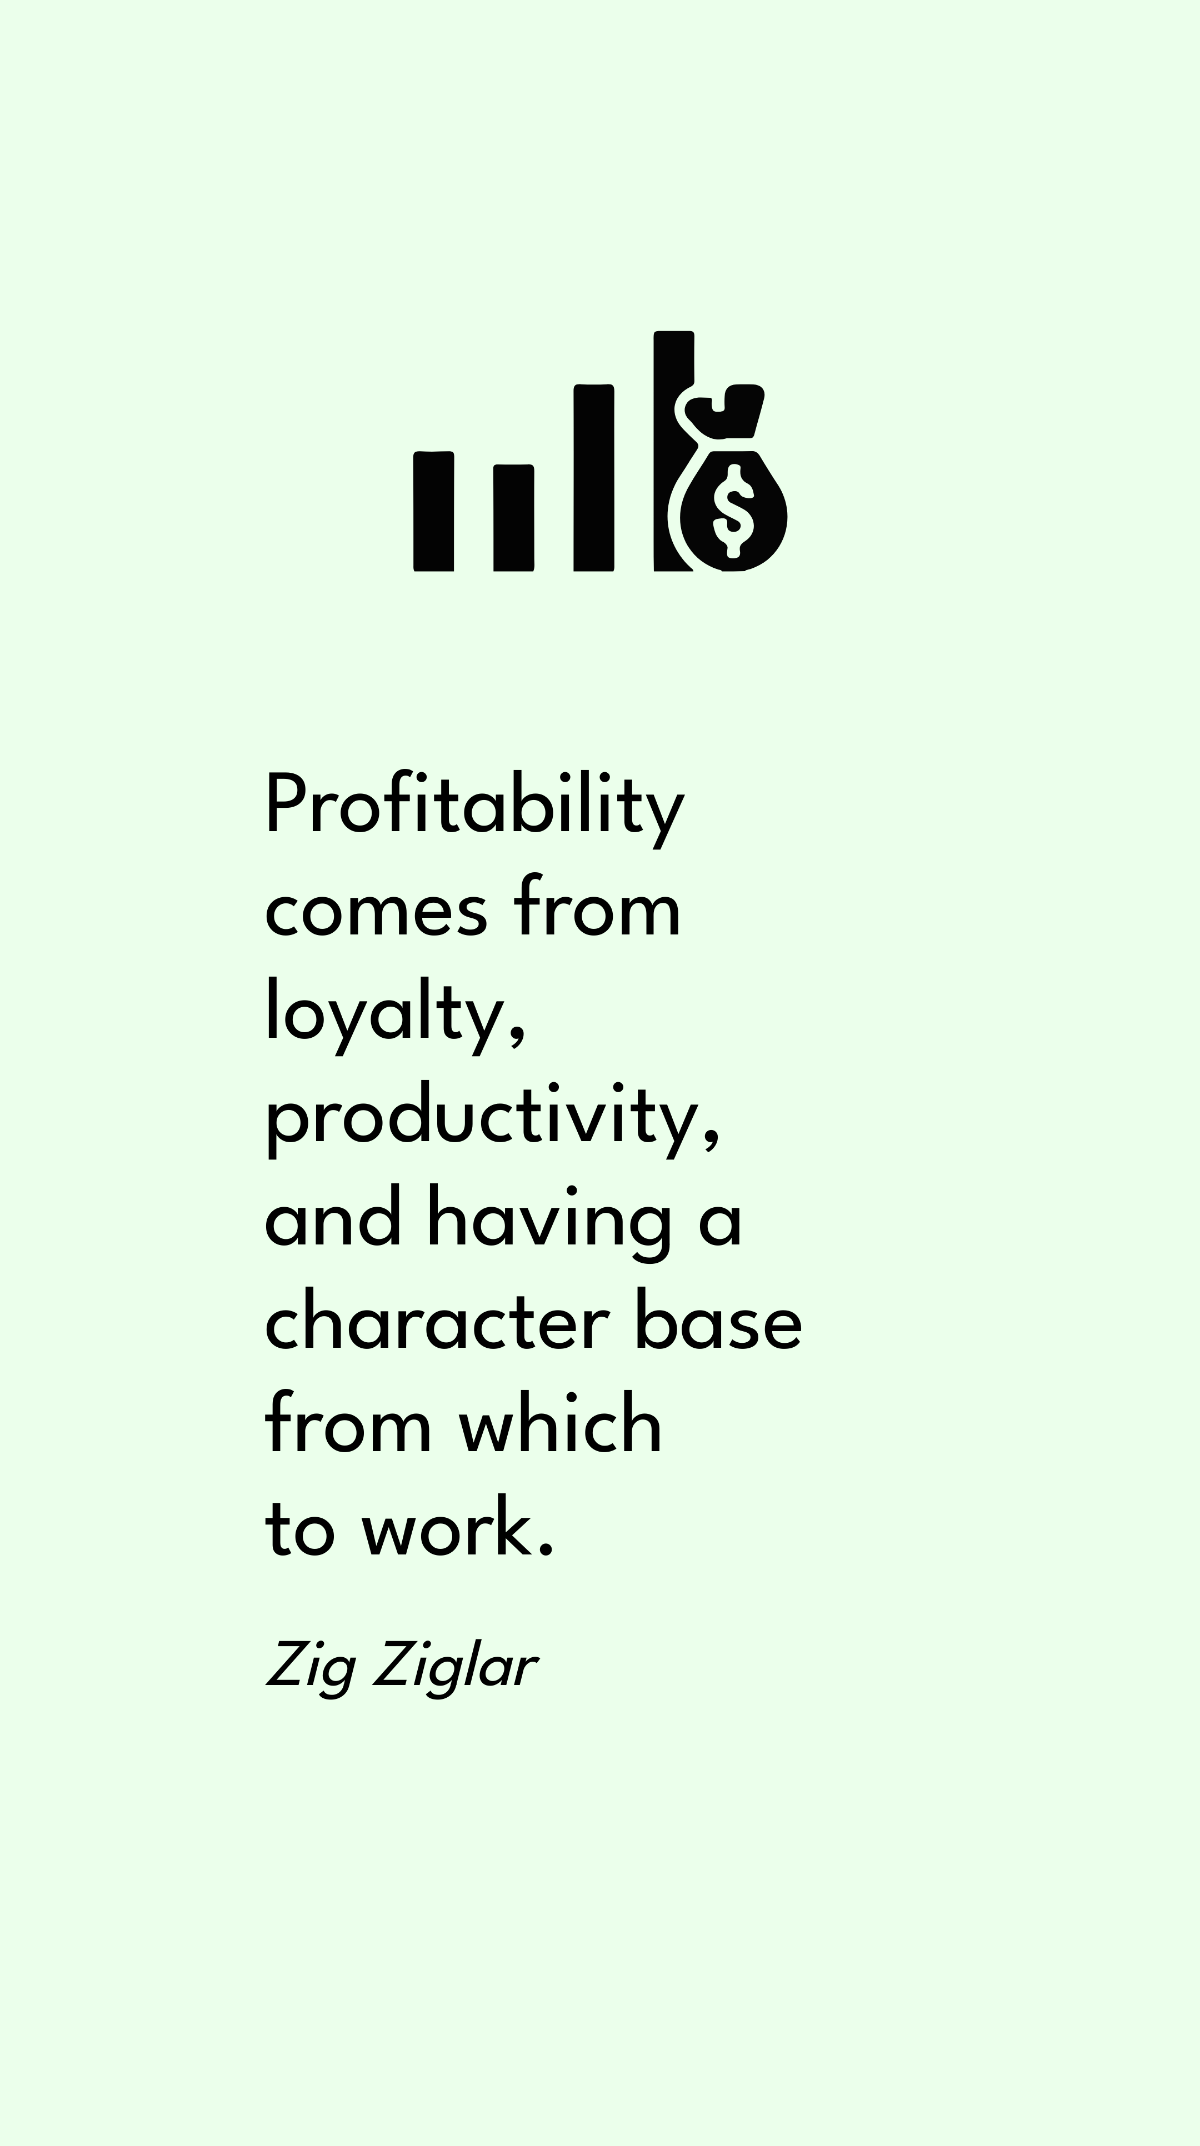 Free Zig Ziglar - Profitability comes from loyalty, productivity, and having a character base from which to work. Template